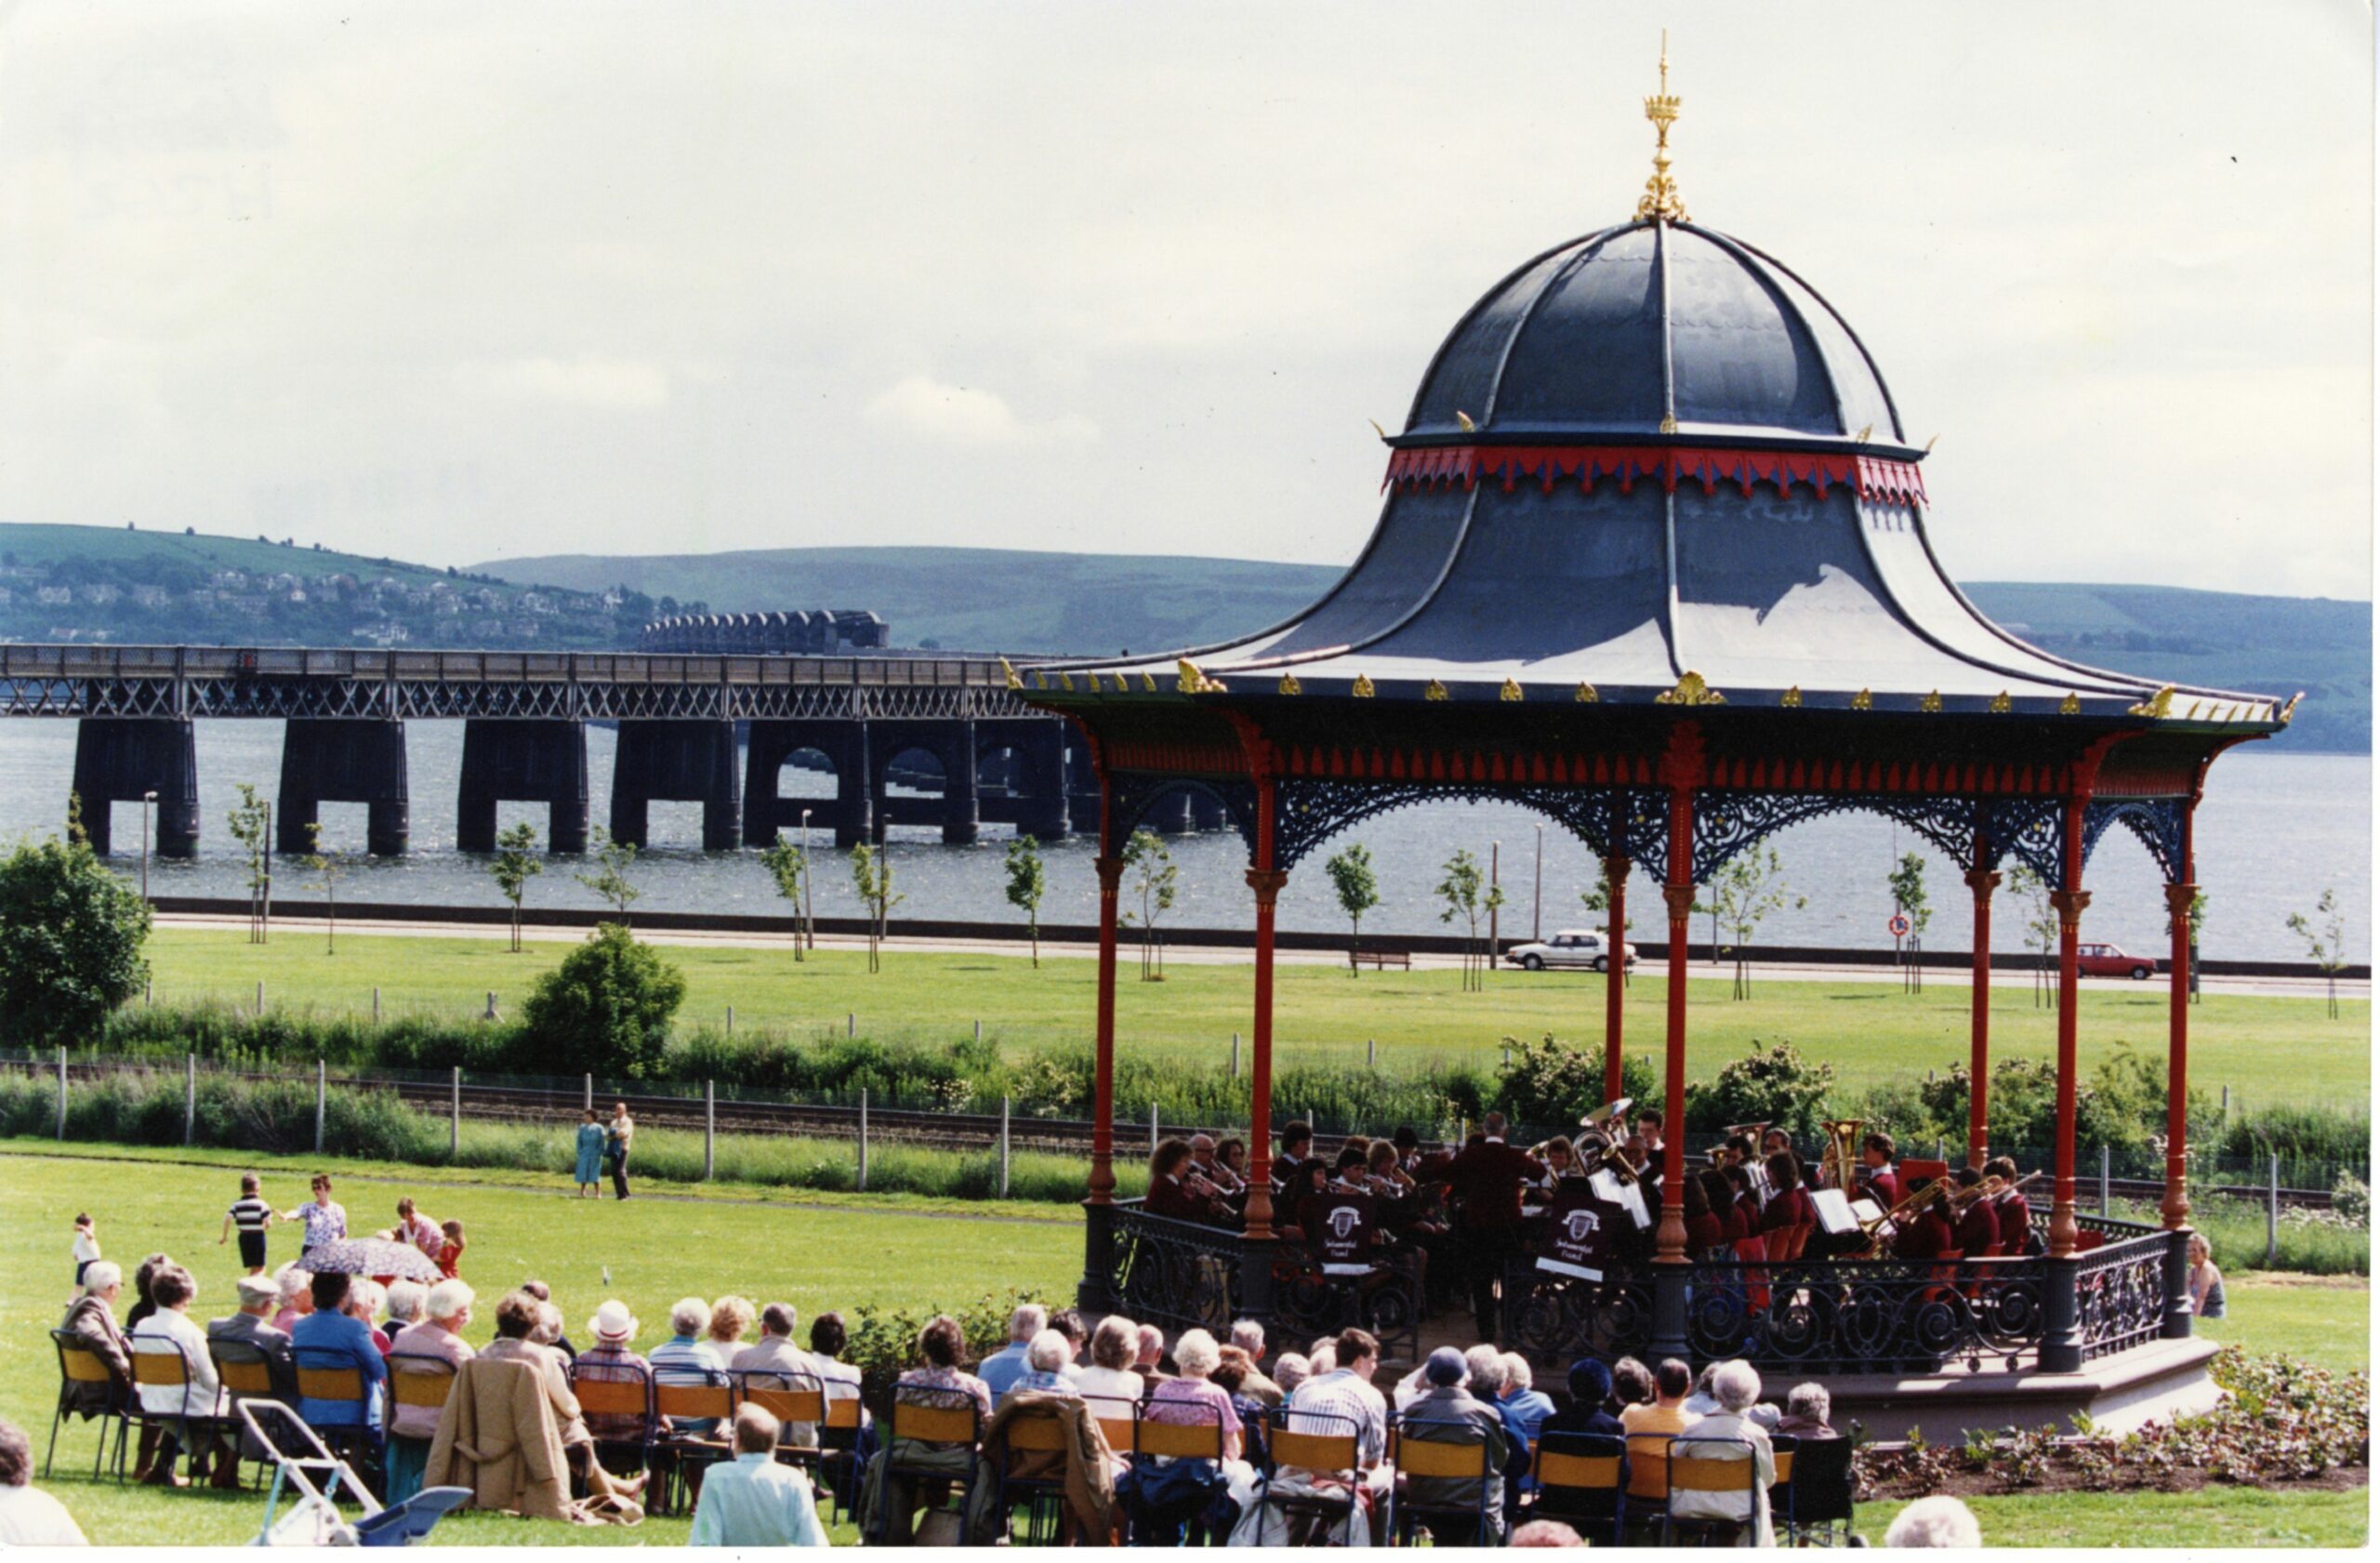 A crowd watching Arbroath Instrumental Band performing at the bandstand 